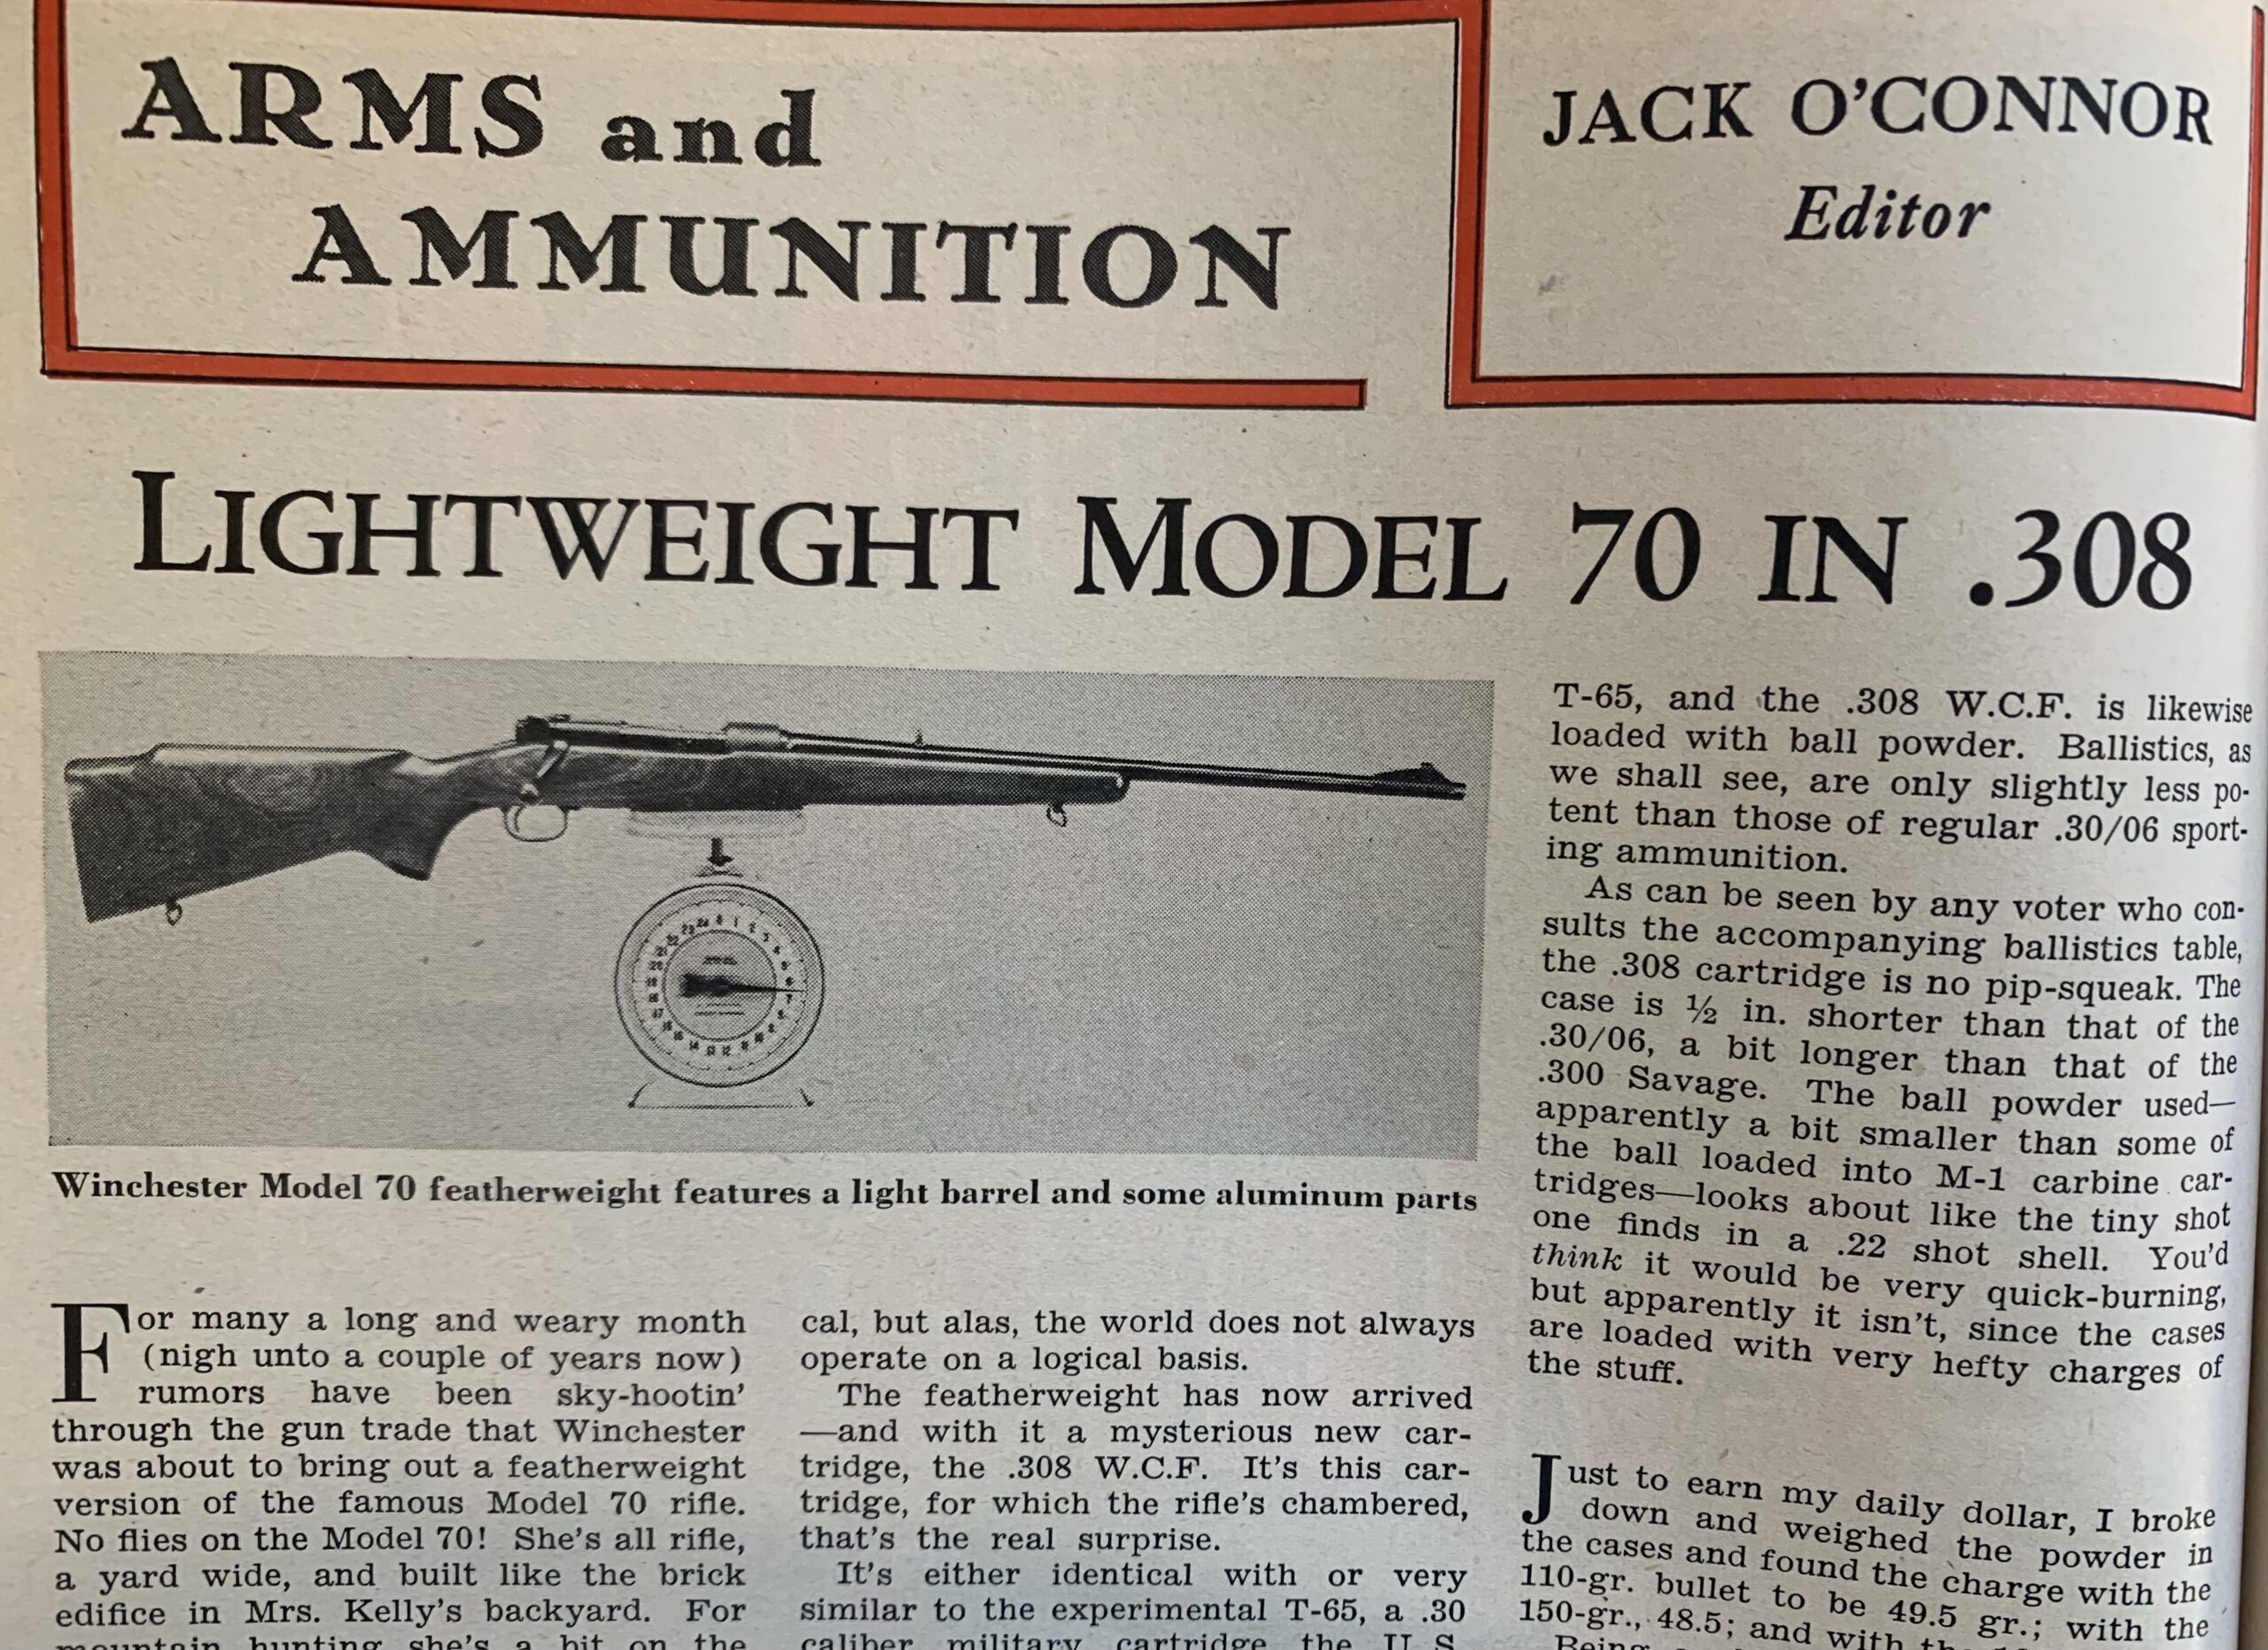 Original review of the M70 Featherweight in Outdoor Life